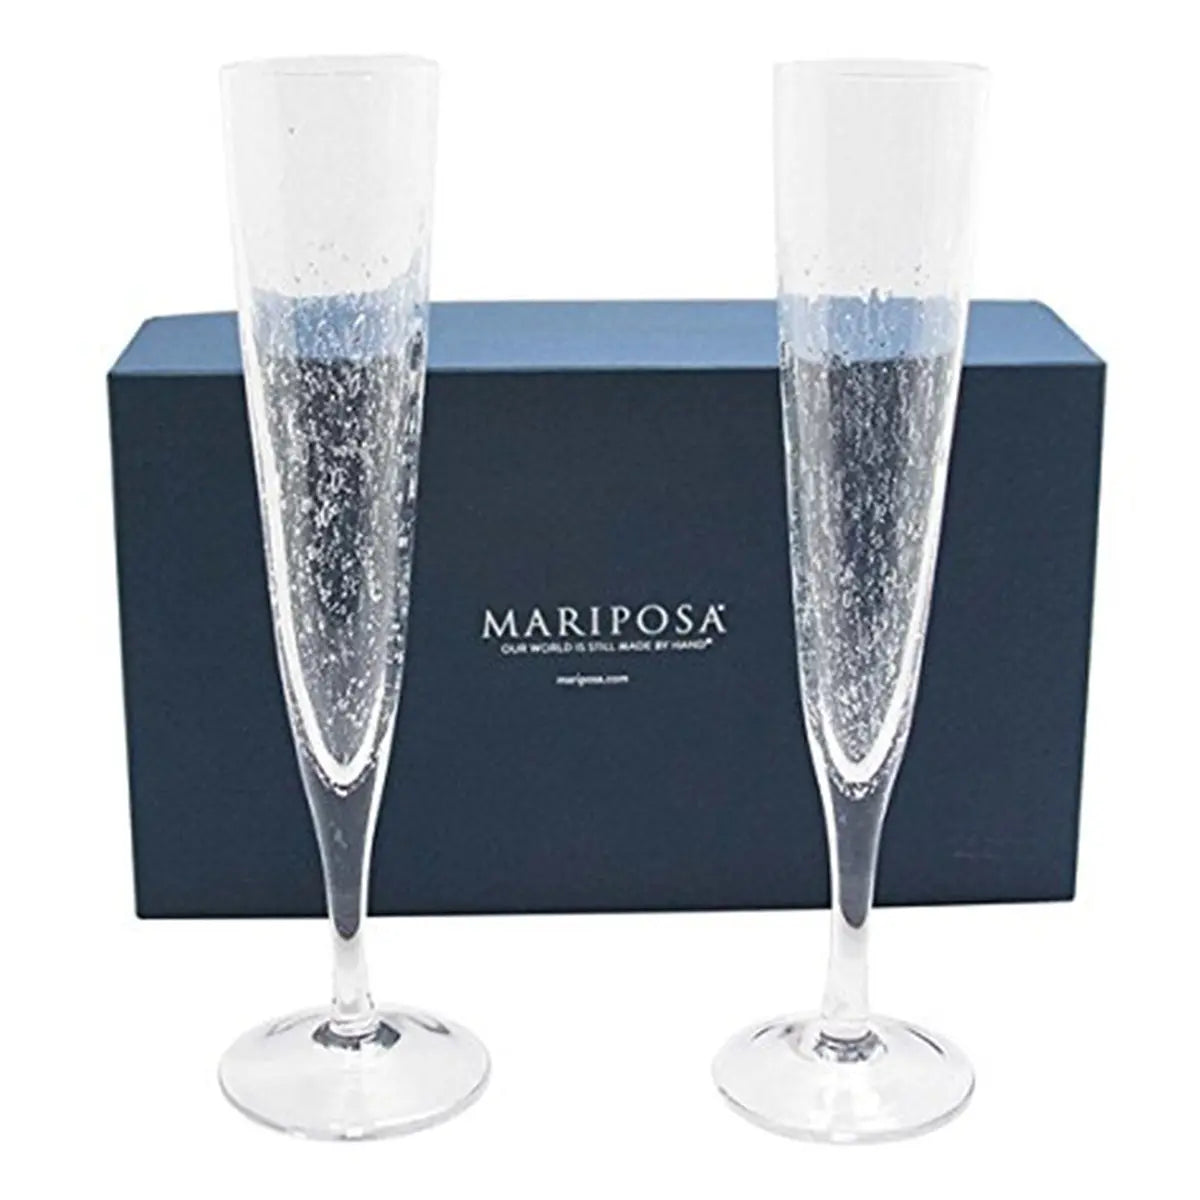 Mariposa Bellini Champagne Flute IN Set of 2 and a gift box